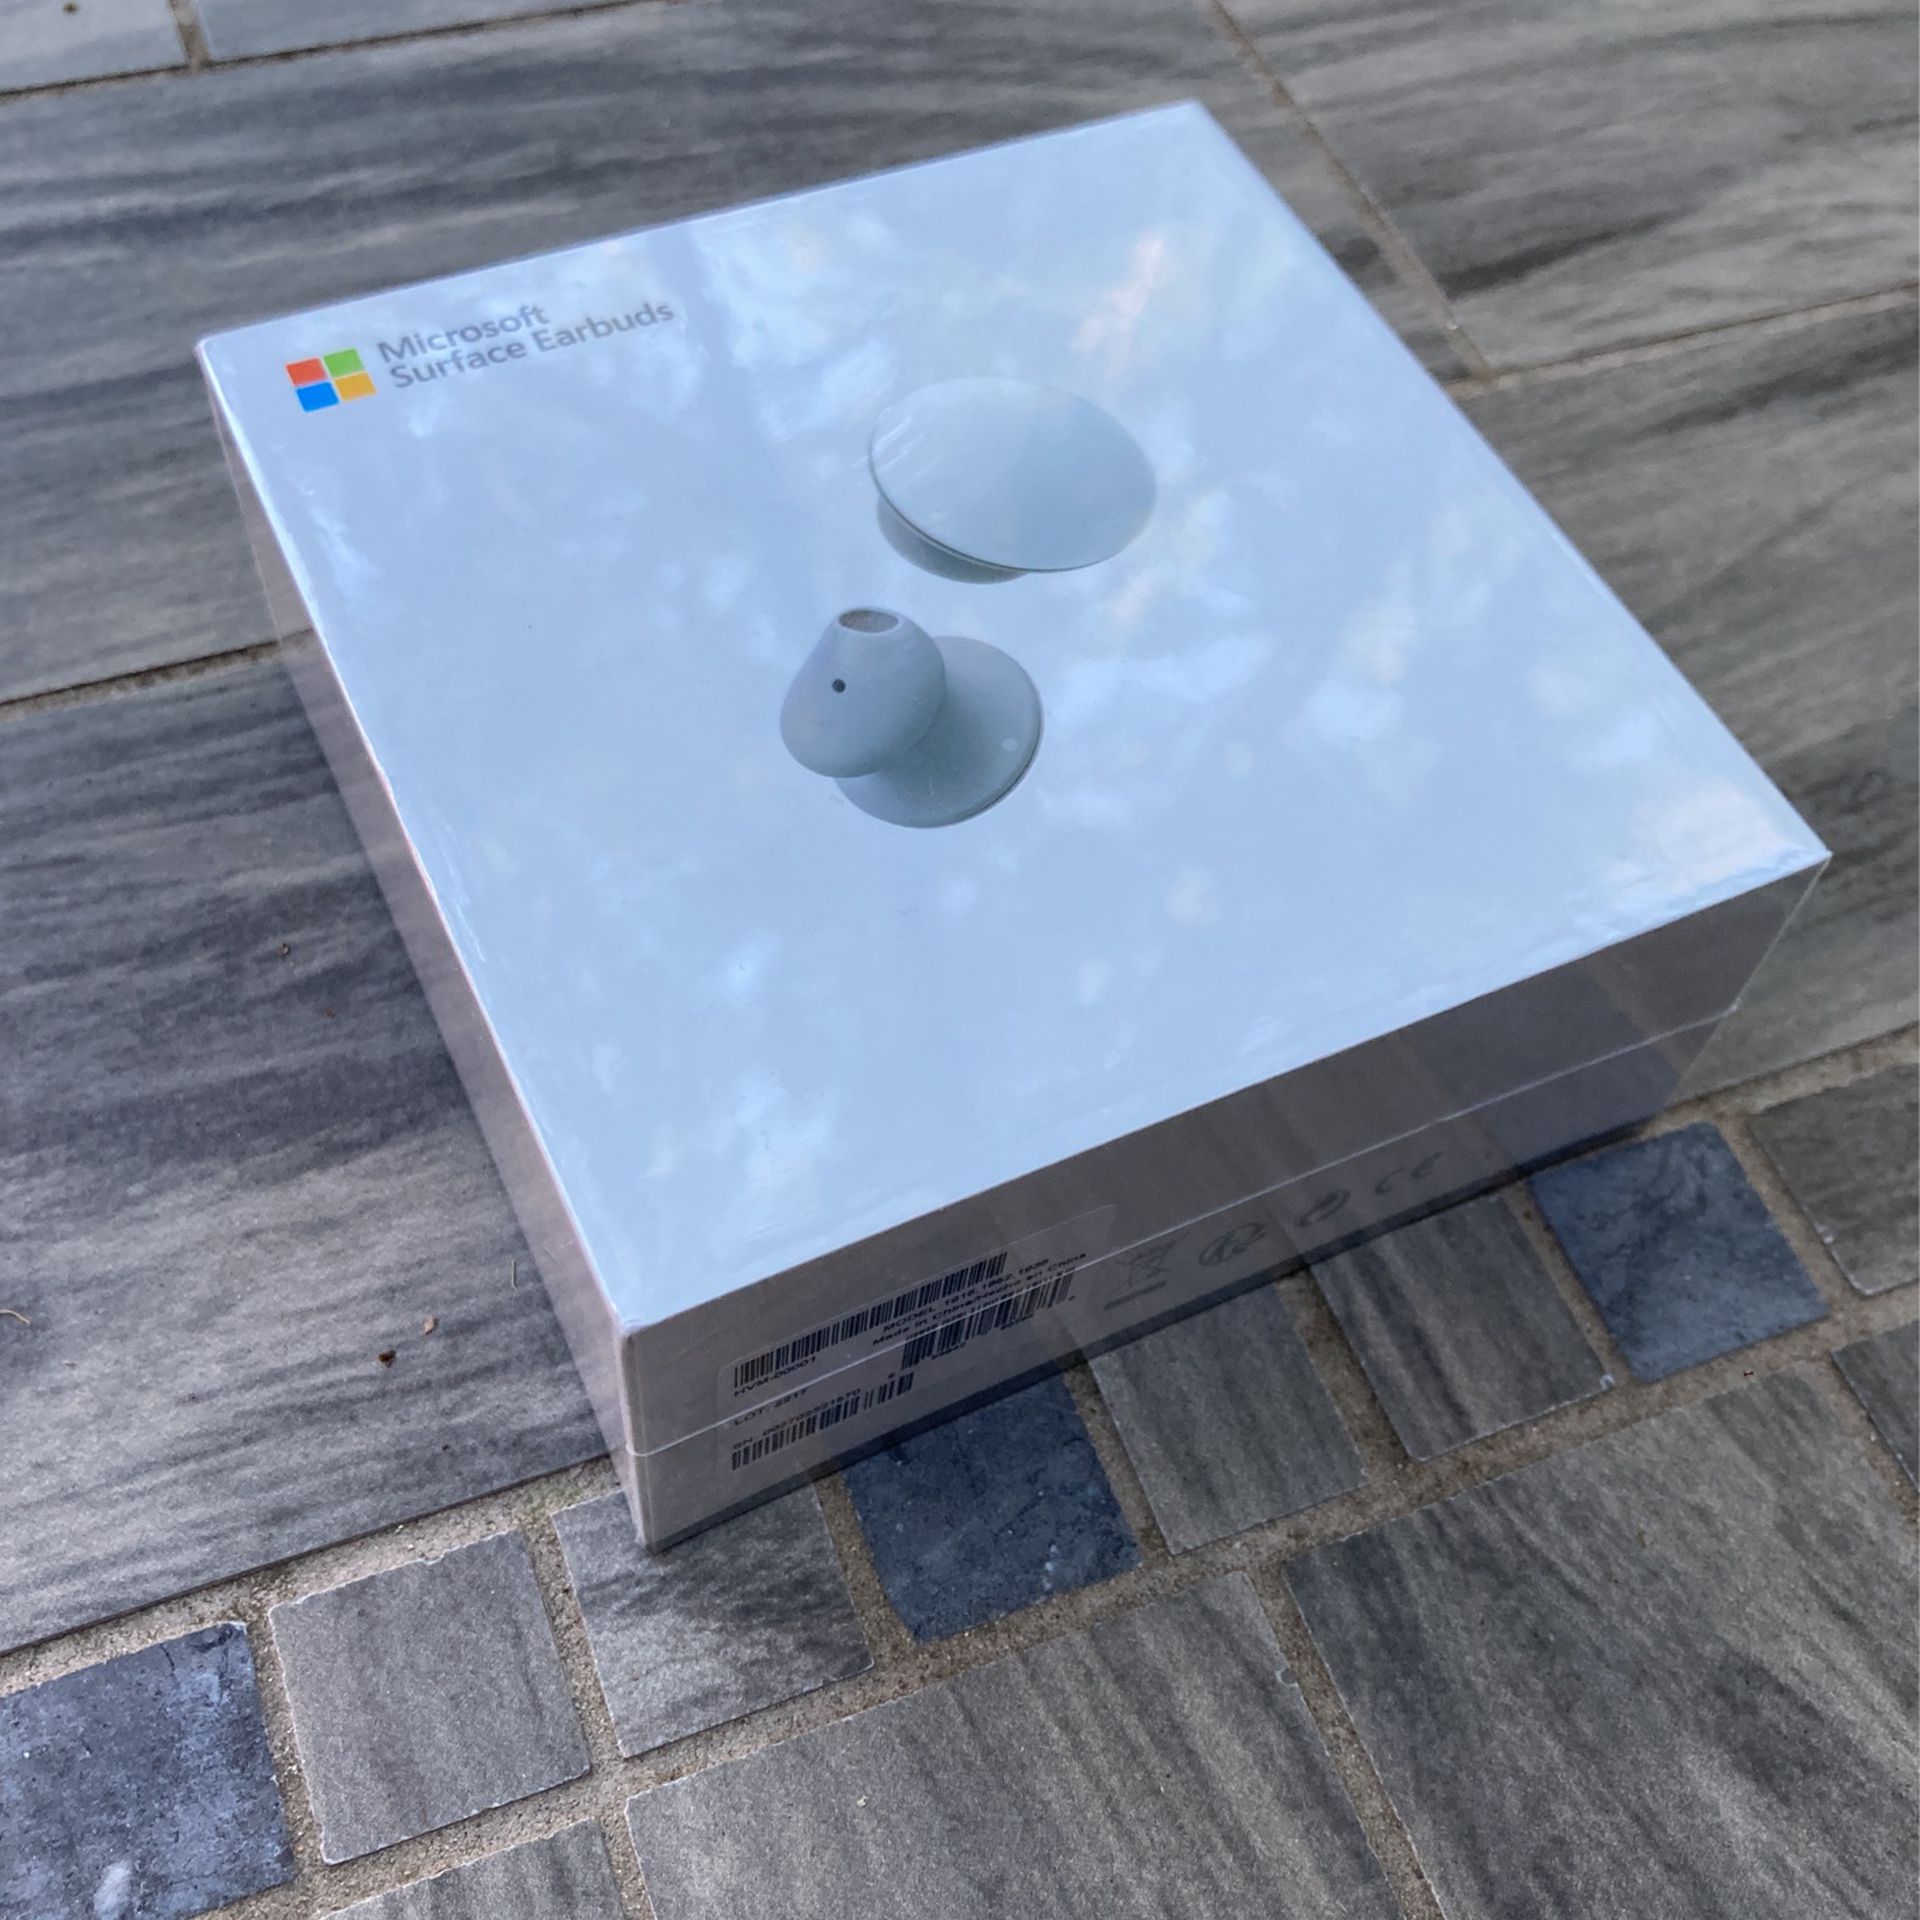 Microsoft Surface Earbuds - New